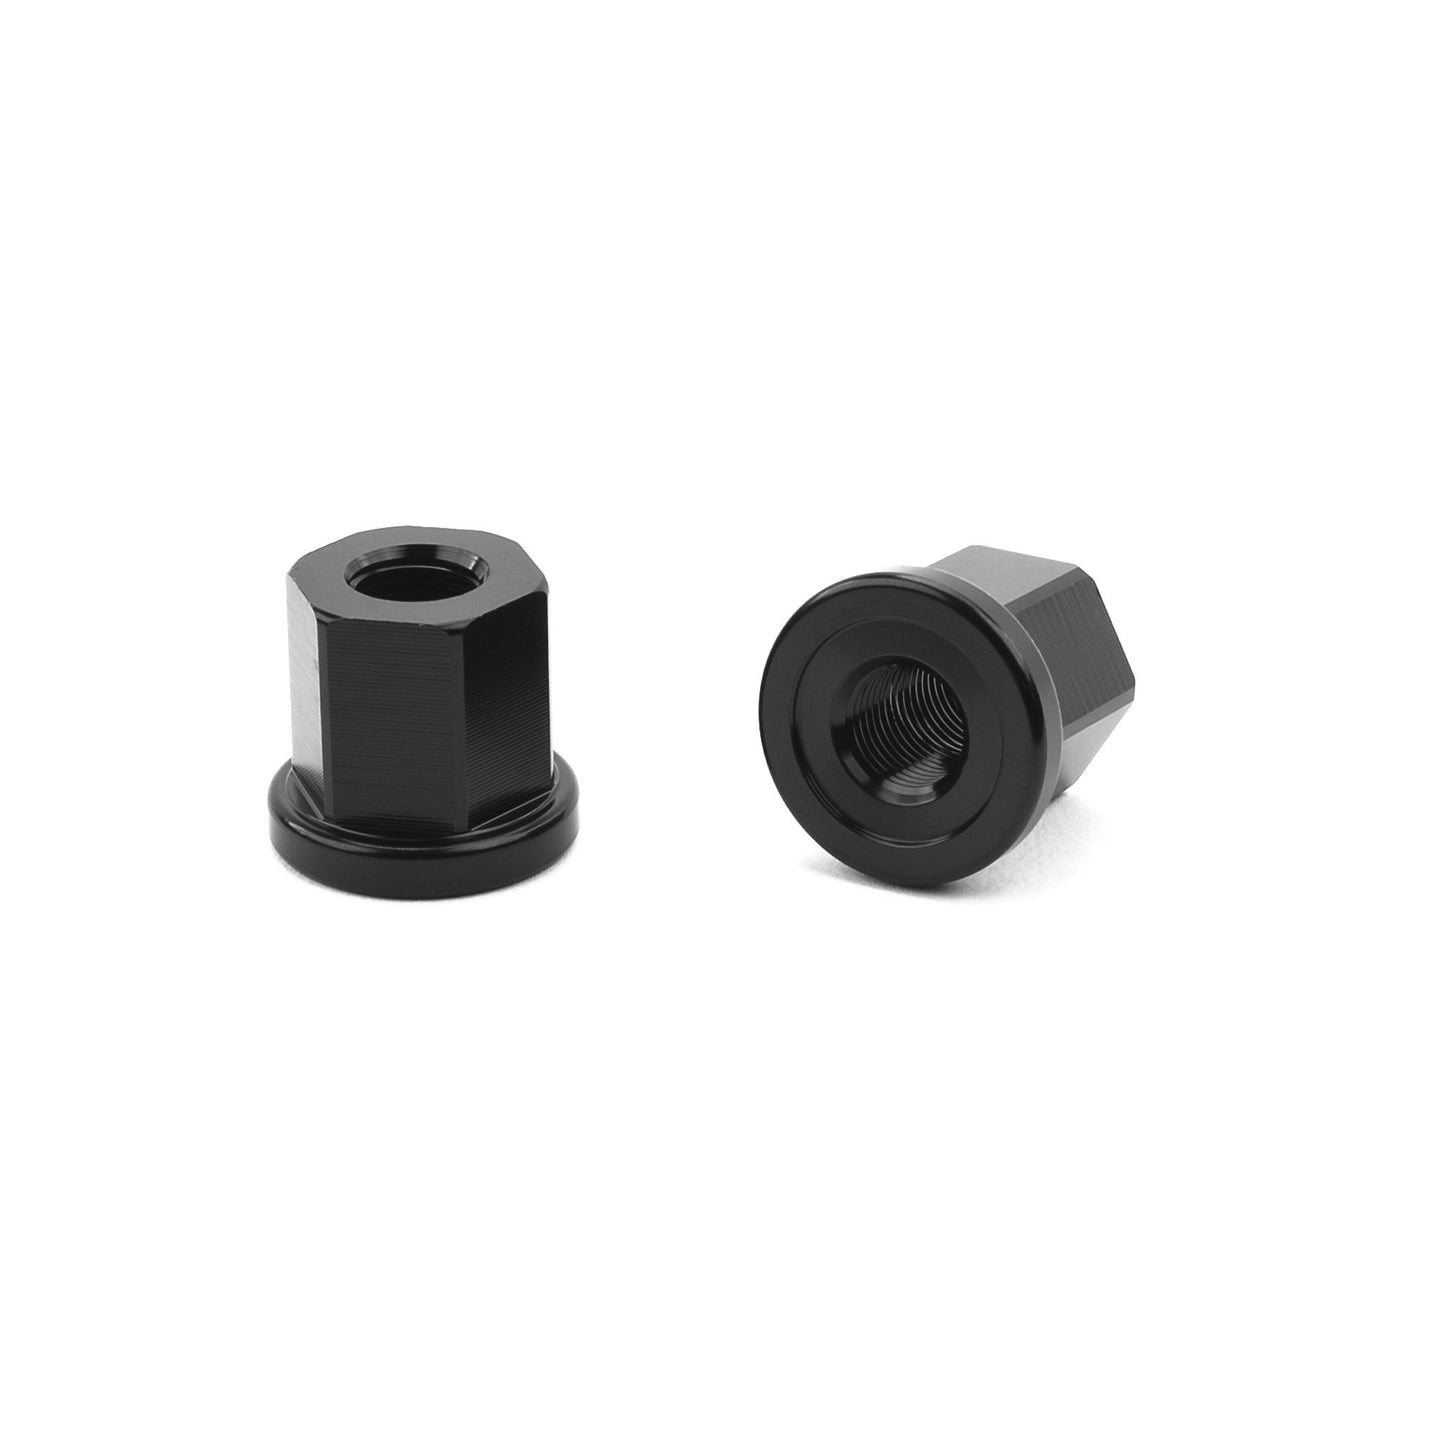 MISSION ALLOY AXLE NUTS